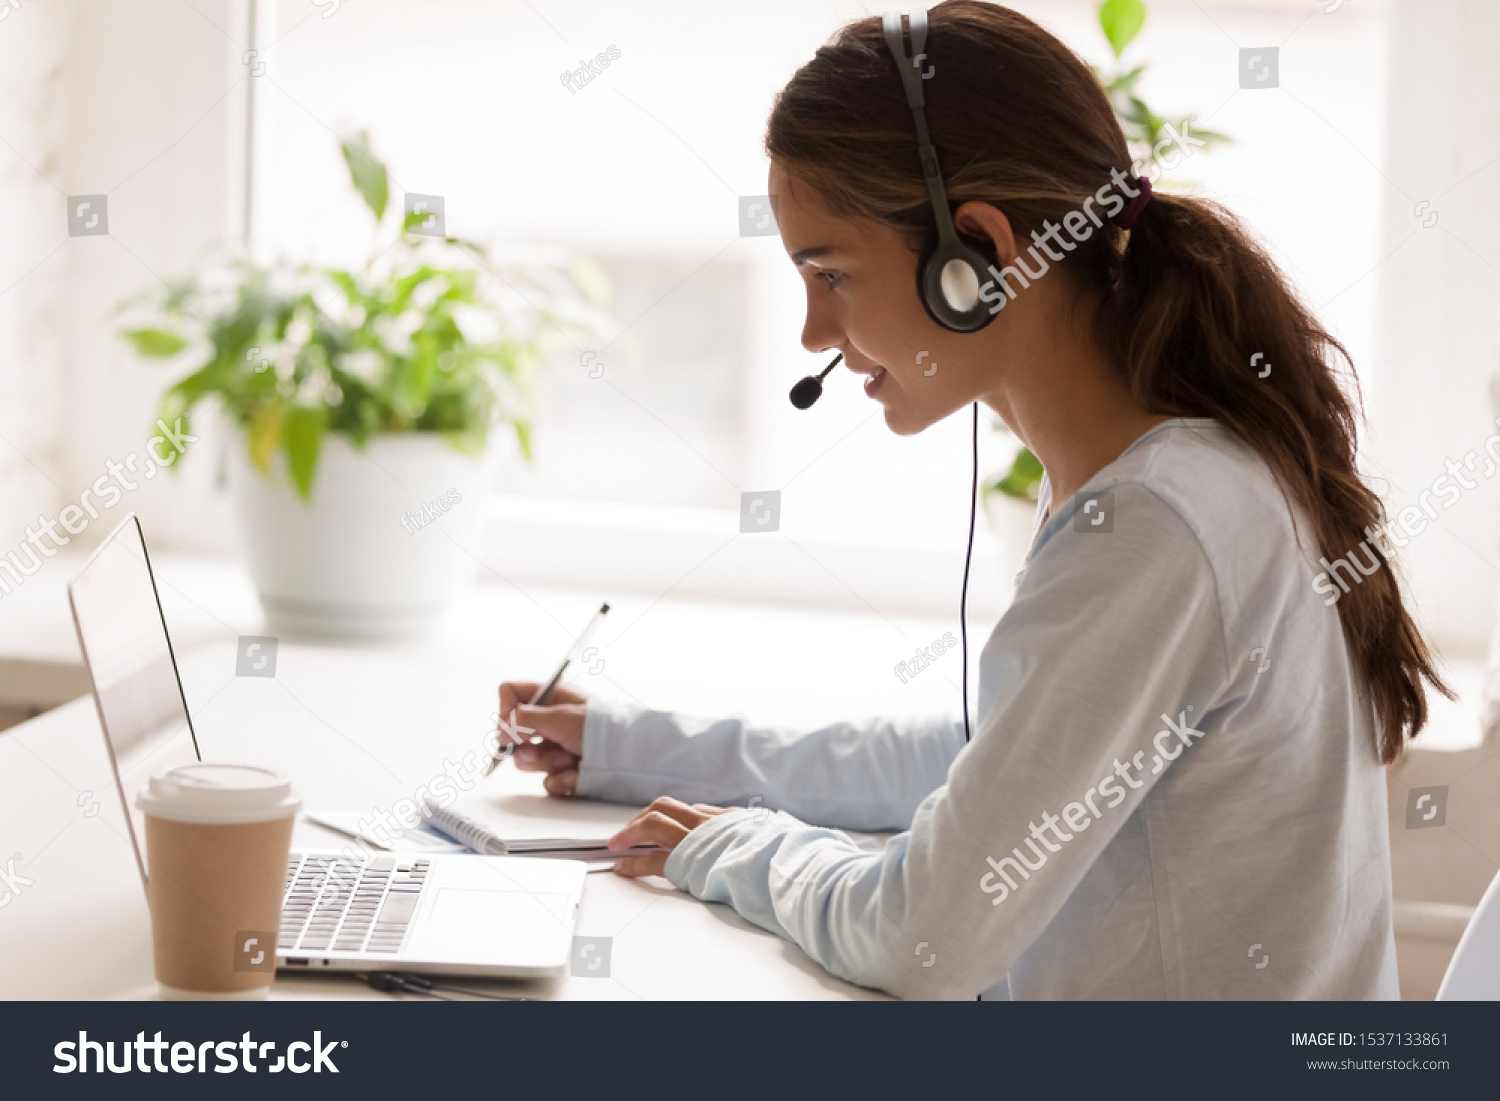 Side view concentrated millennial mixed race woman wearing headset with microphone, looking at laptop screen, listening educational webinar, taking notes, getting remote online education at home. #1537133861